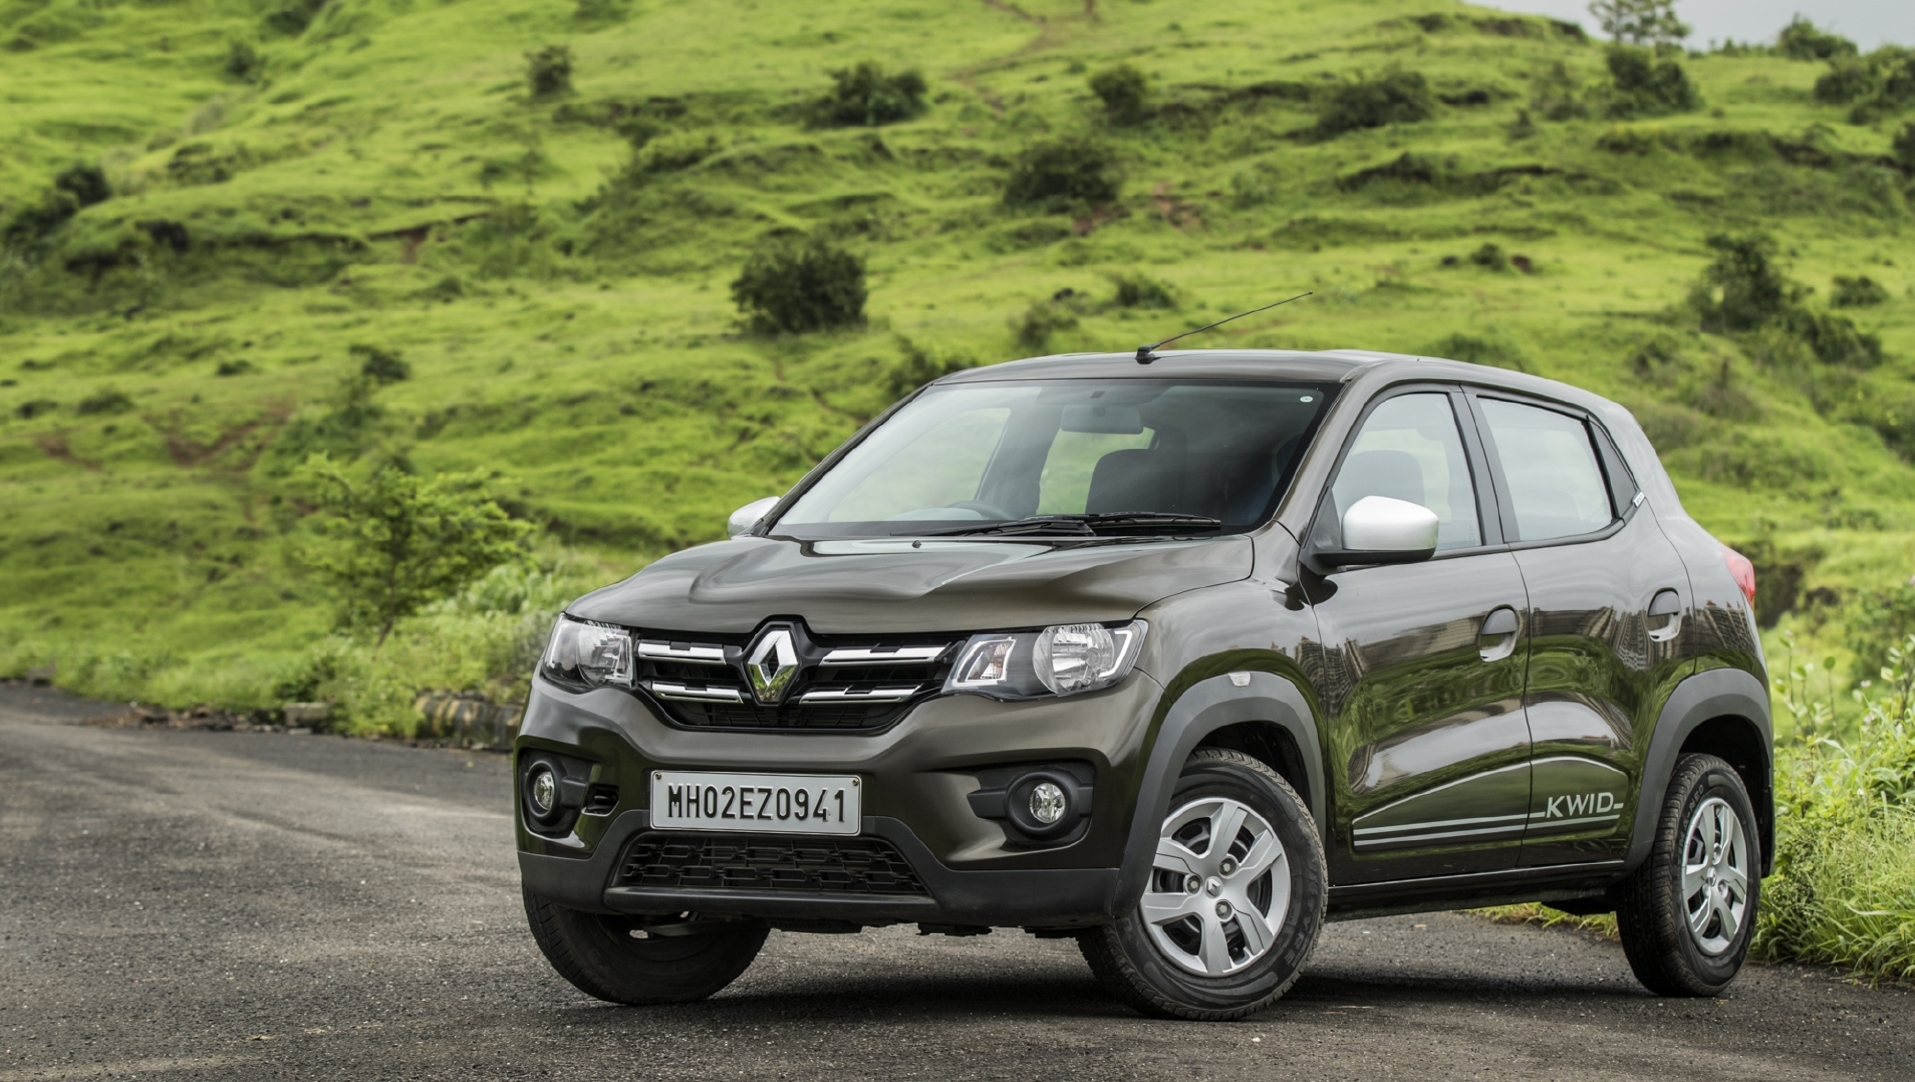 Renault Kwid in India Receives Improvements Without